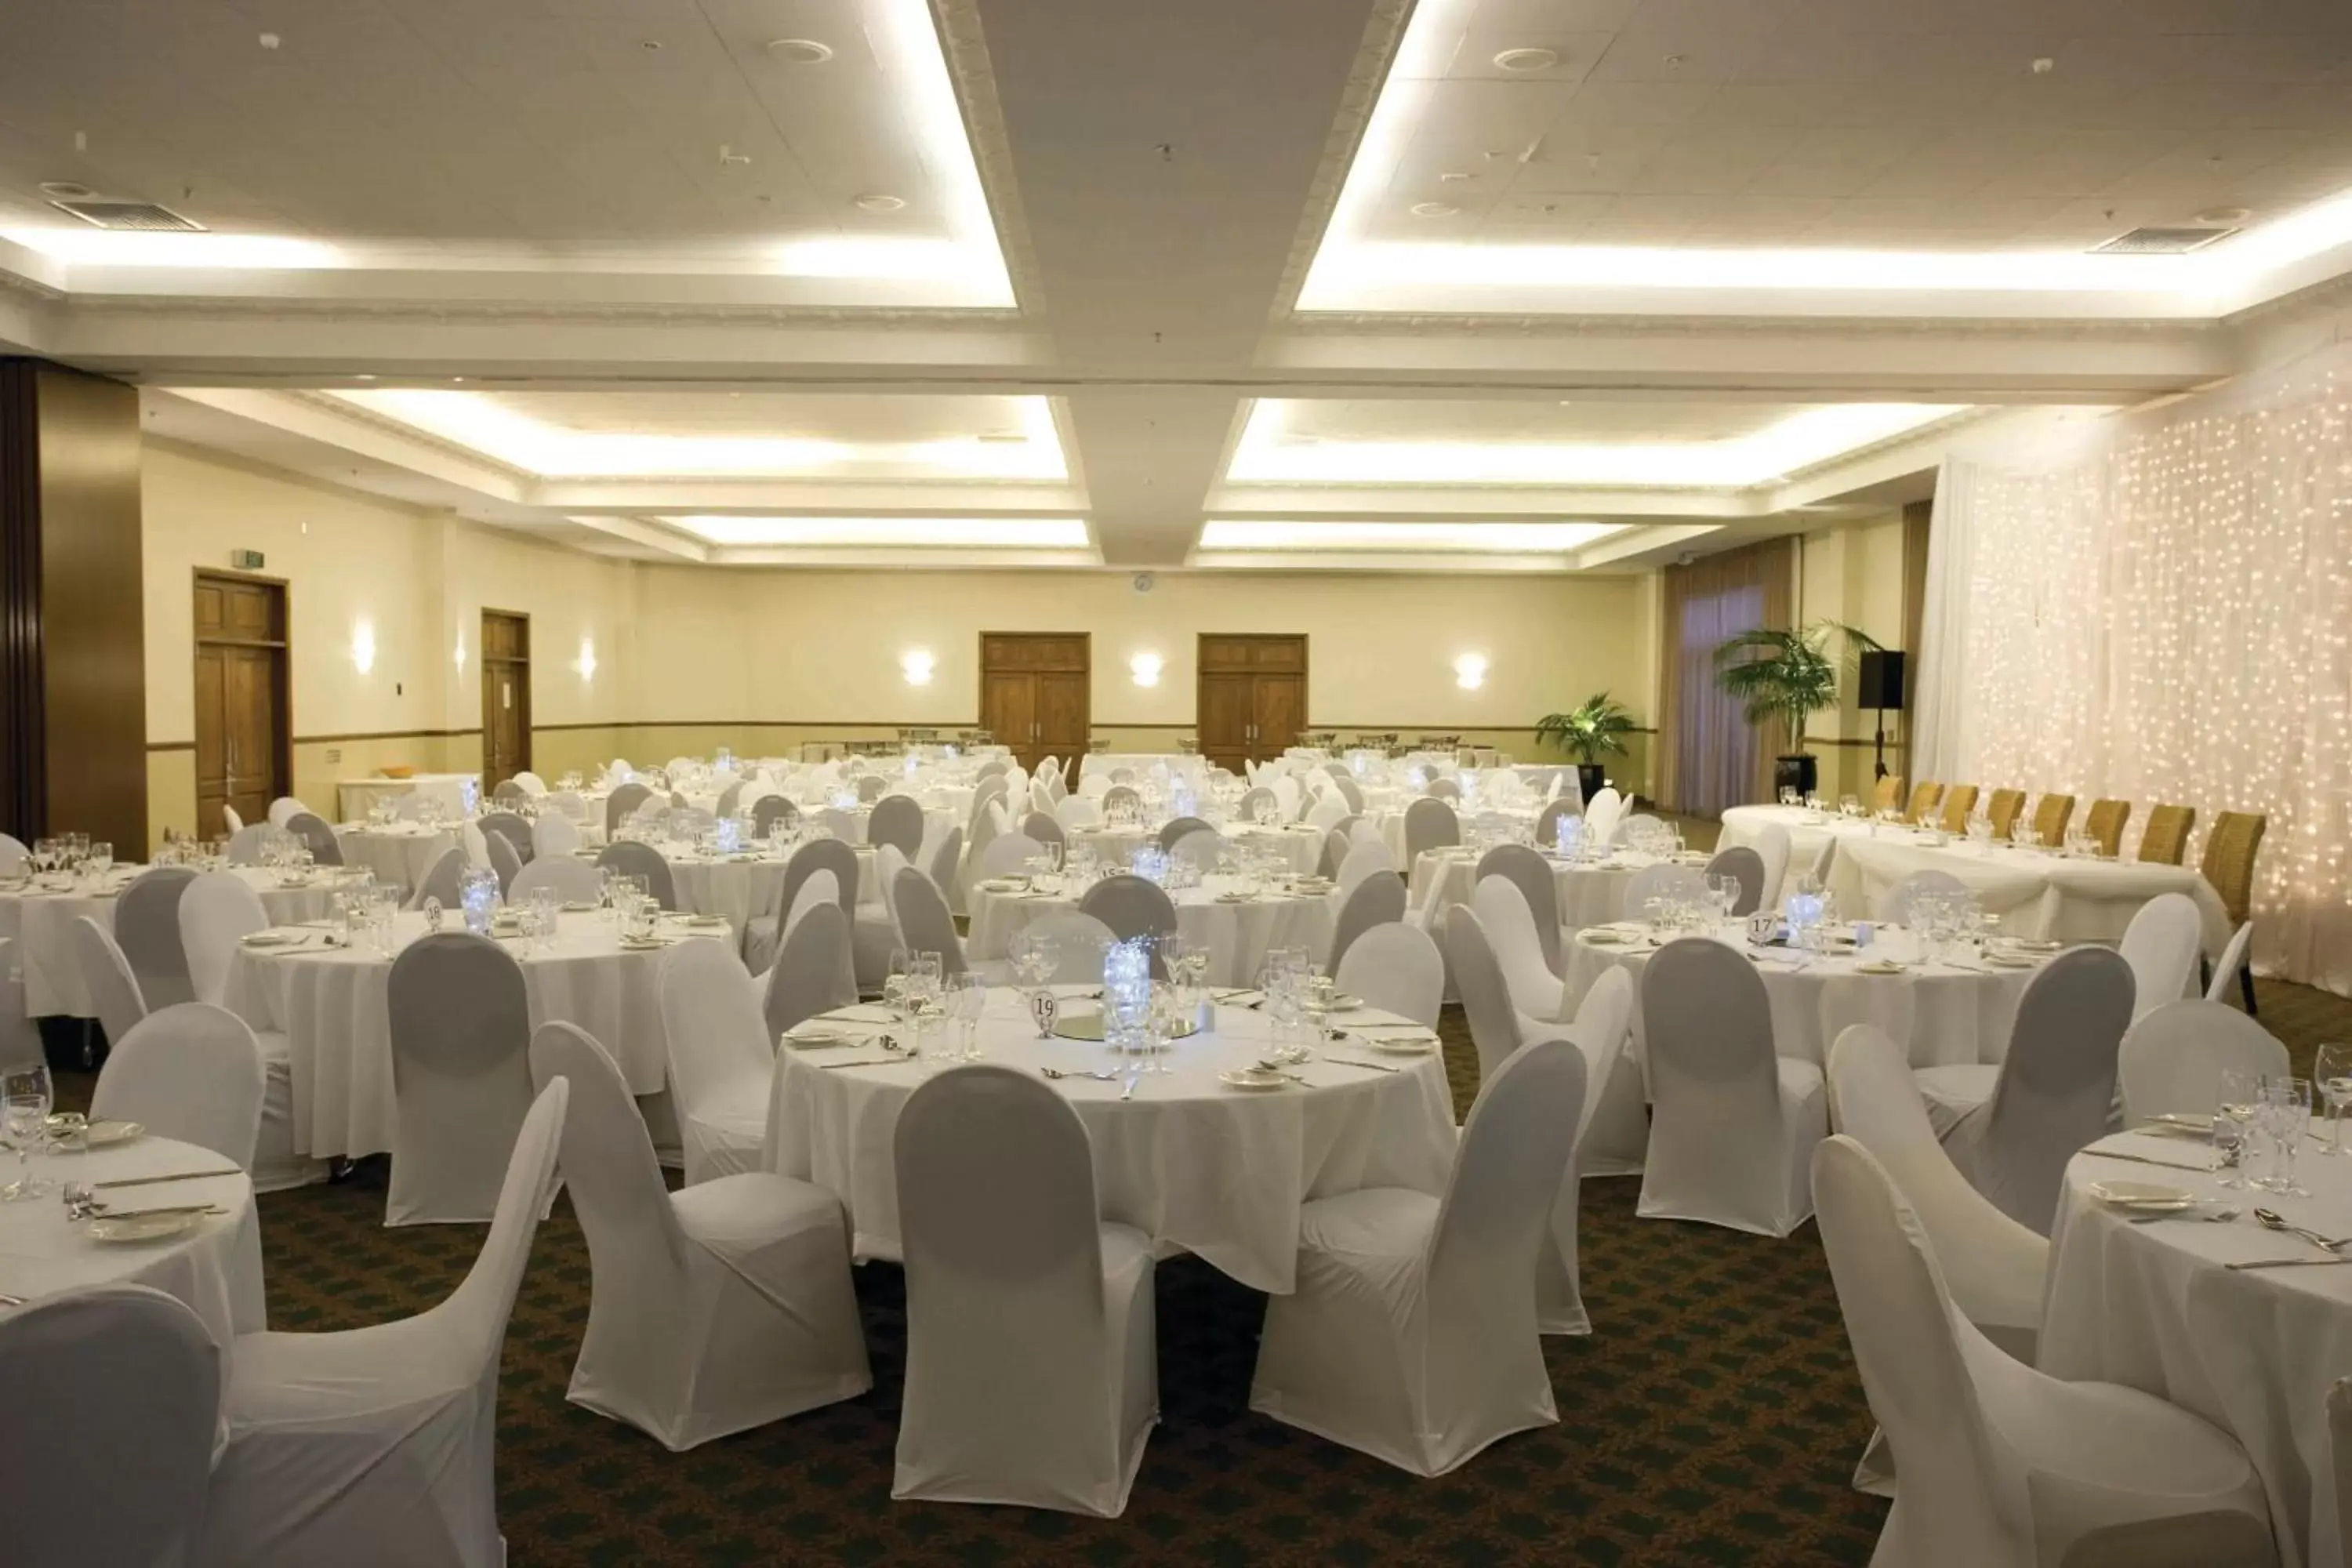 Banquet/Function facilities, Banquet Facilities in Distinction Palmerston North Hotel & Conference Centre